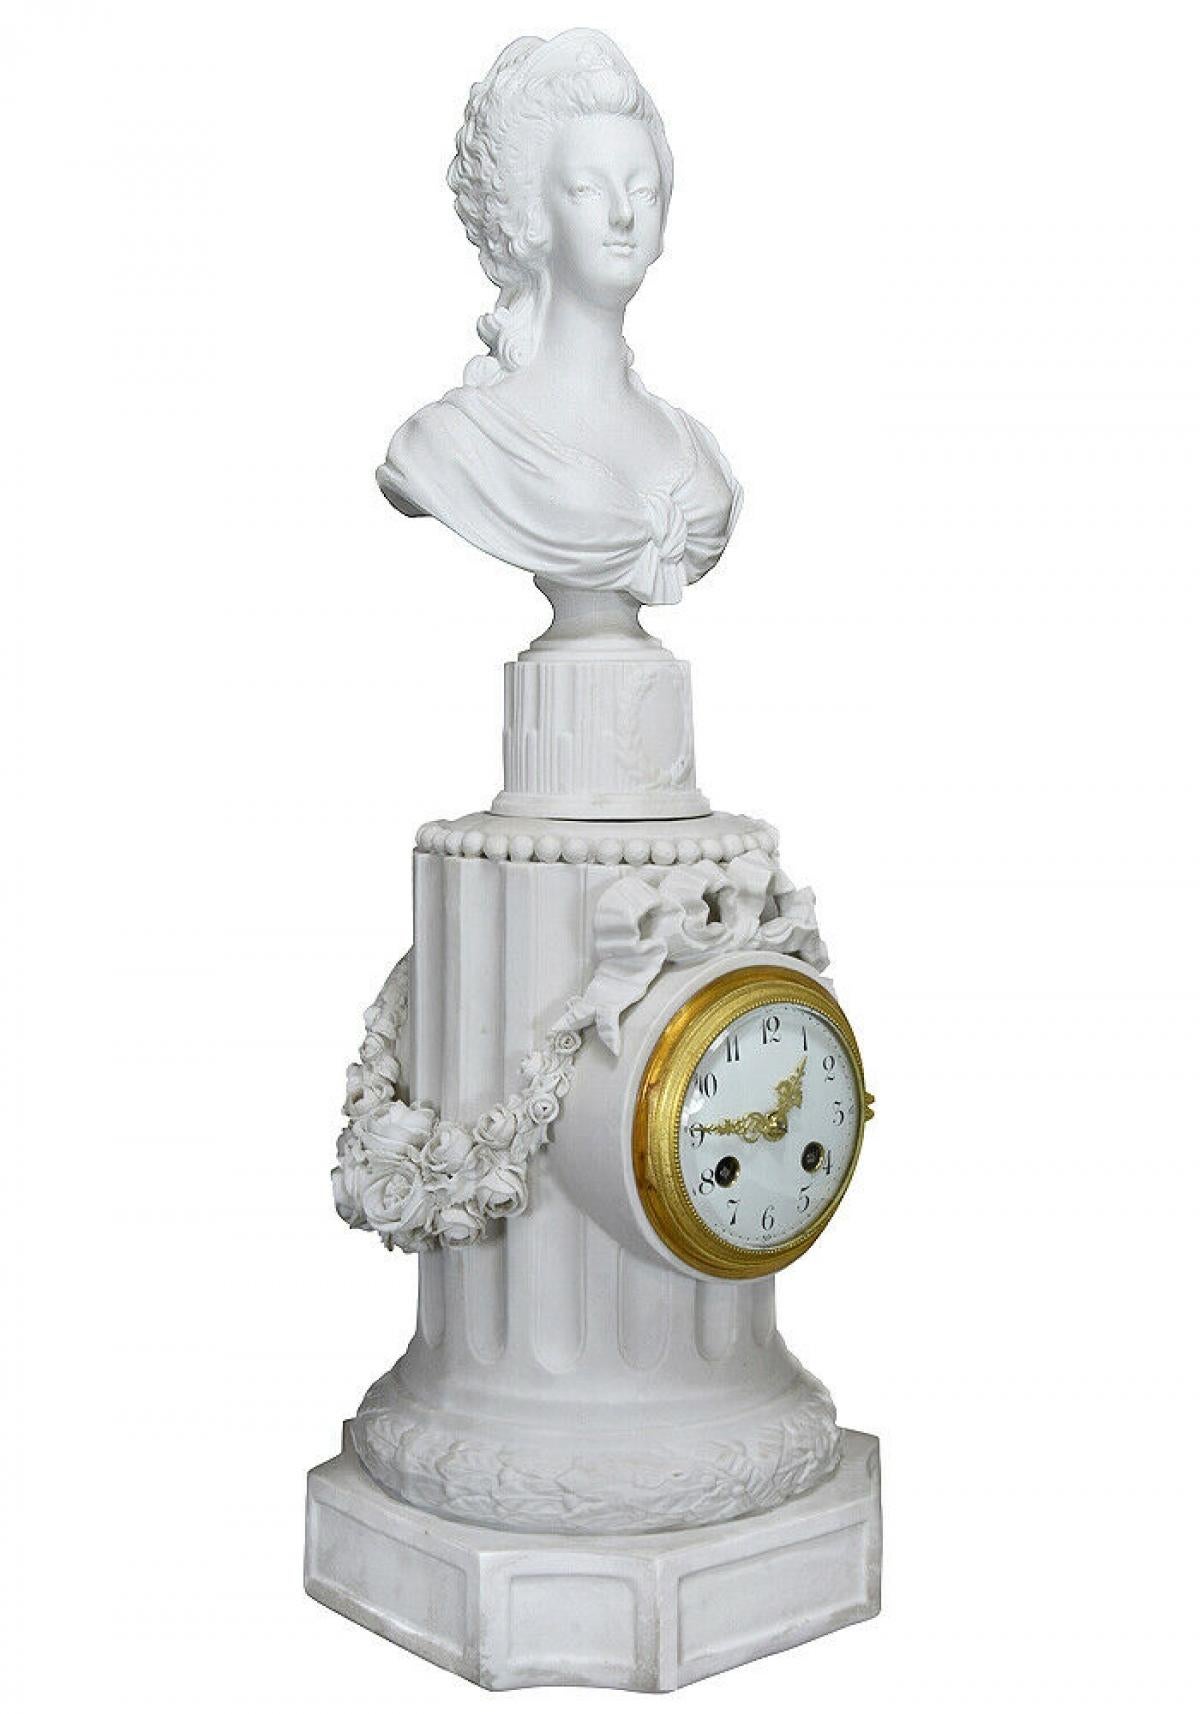 Large biscuit clock - Marie-Antoinette
Large clock in finely worked biscuit and gilt bronze. 
Period: Napoleon III - 19th century
Style: Louis XVI
Dimensions: Height : 56cm x width : 20cm x depth : 20cm.